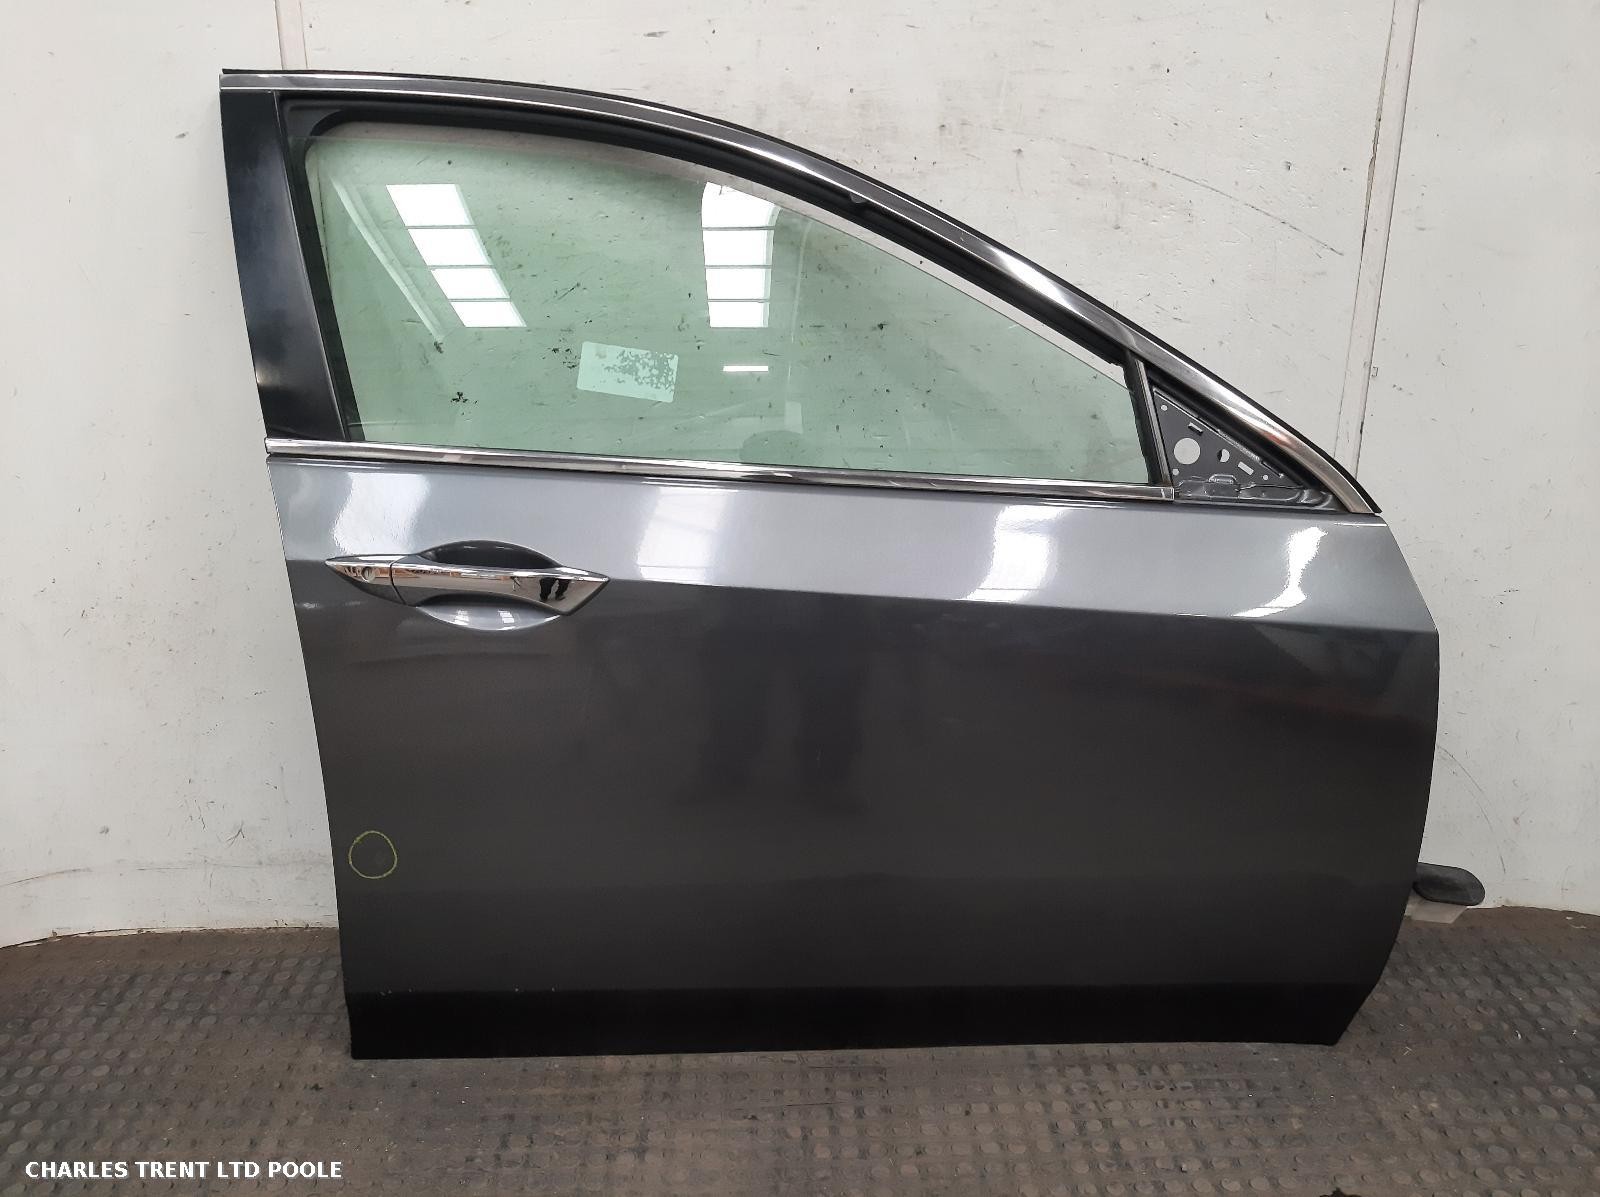 2008 - HONDA - ACCORD - DOOR (FRONT - RIGHT / DRIVER SIDE)